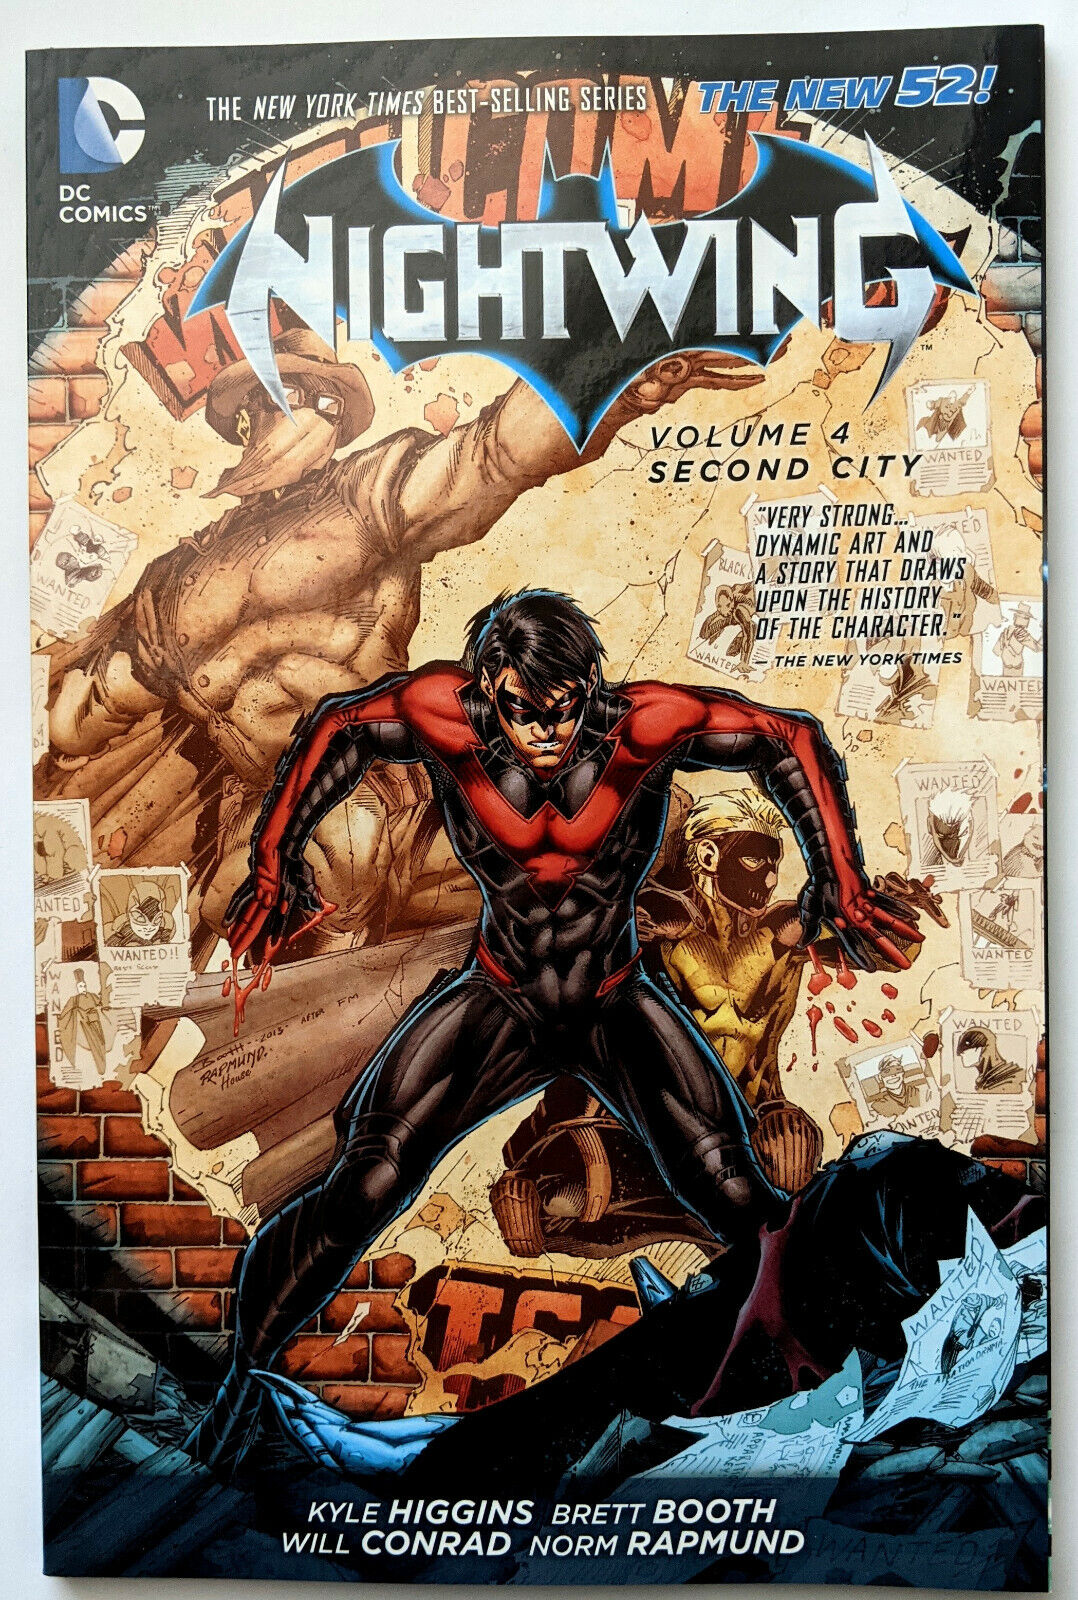 Nightwing Volume 4 Second City The New 52 DC Comics Graphic Novel GN TPB Higgins